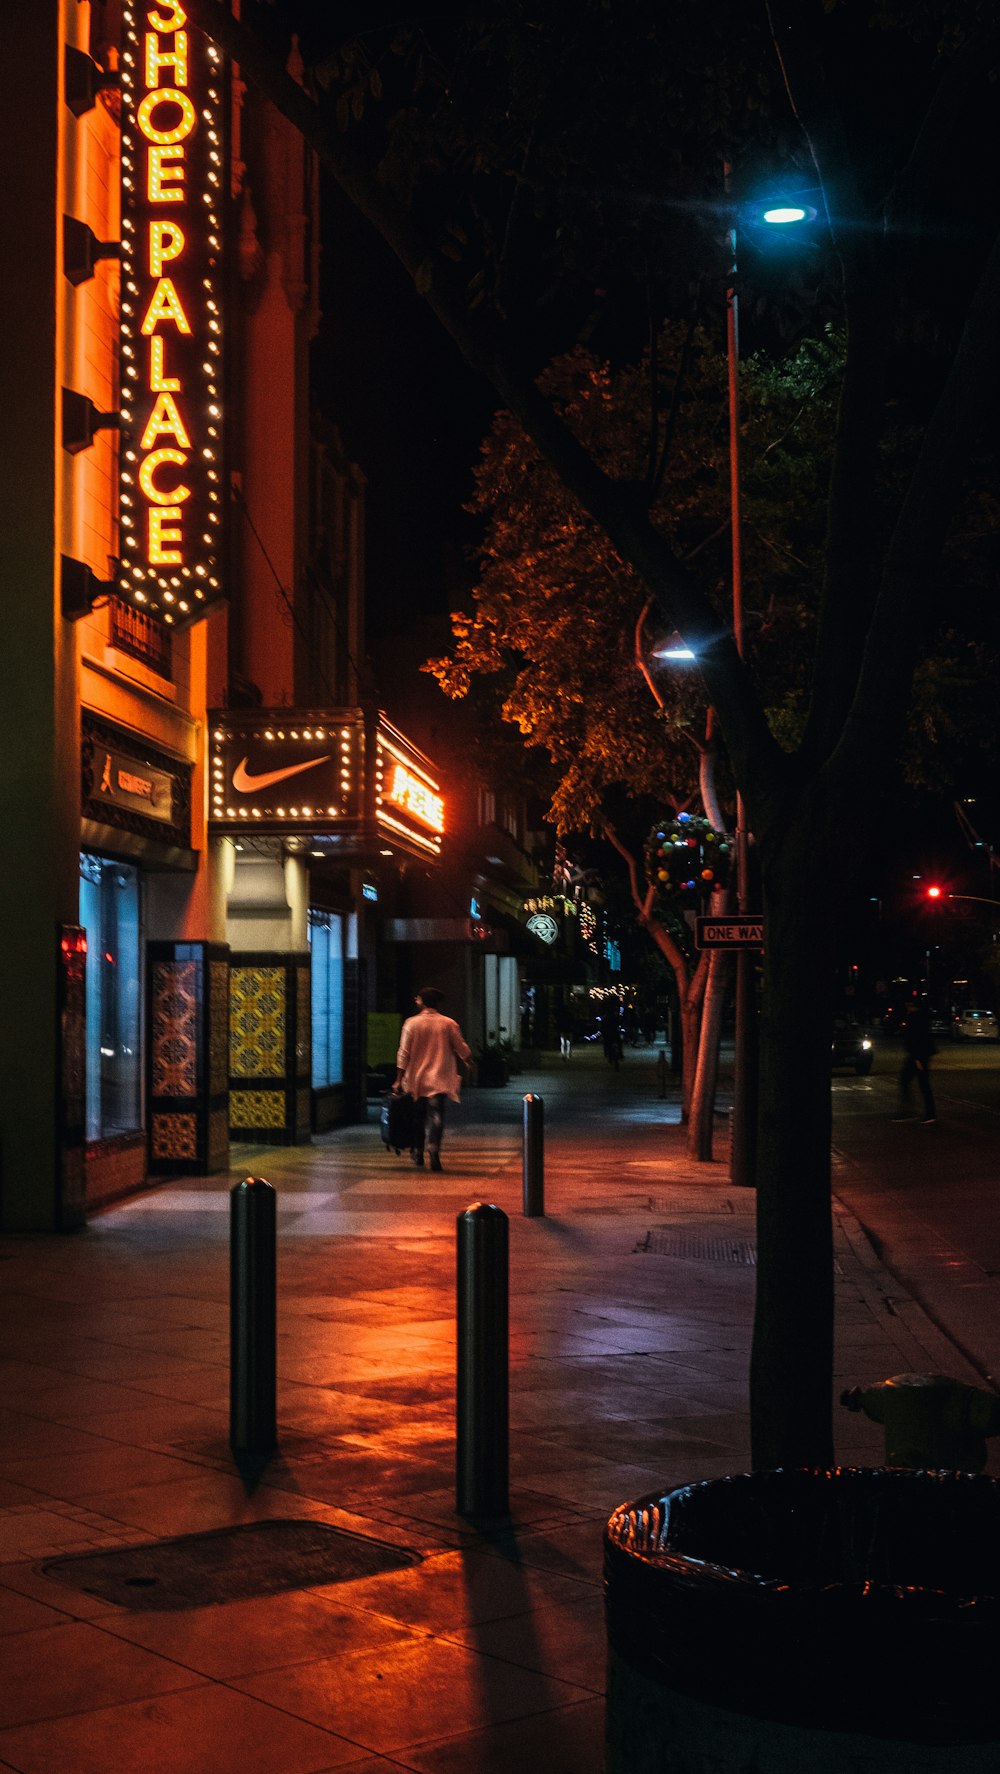 photo of person walking beside a storefront during night time